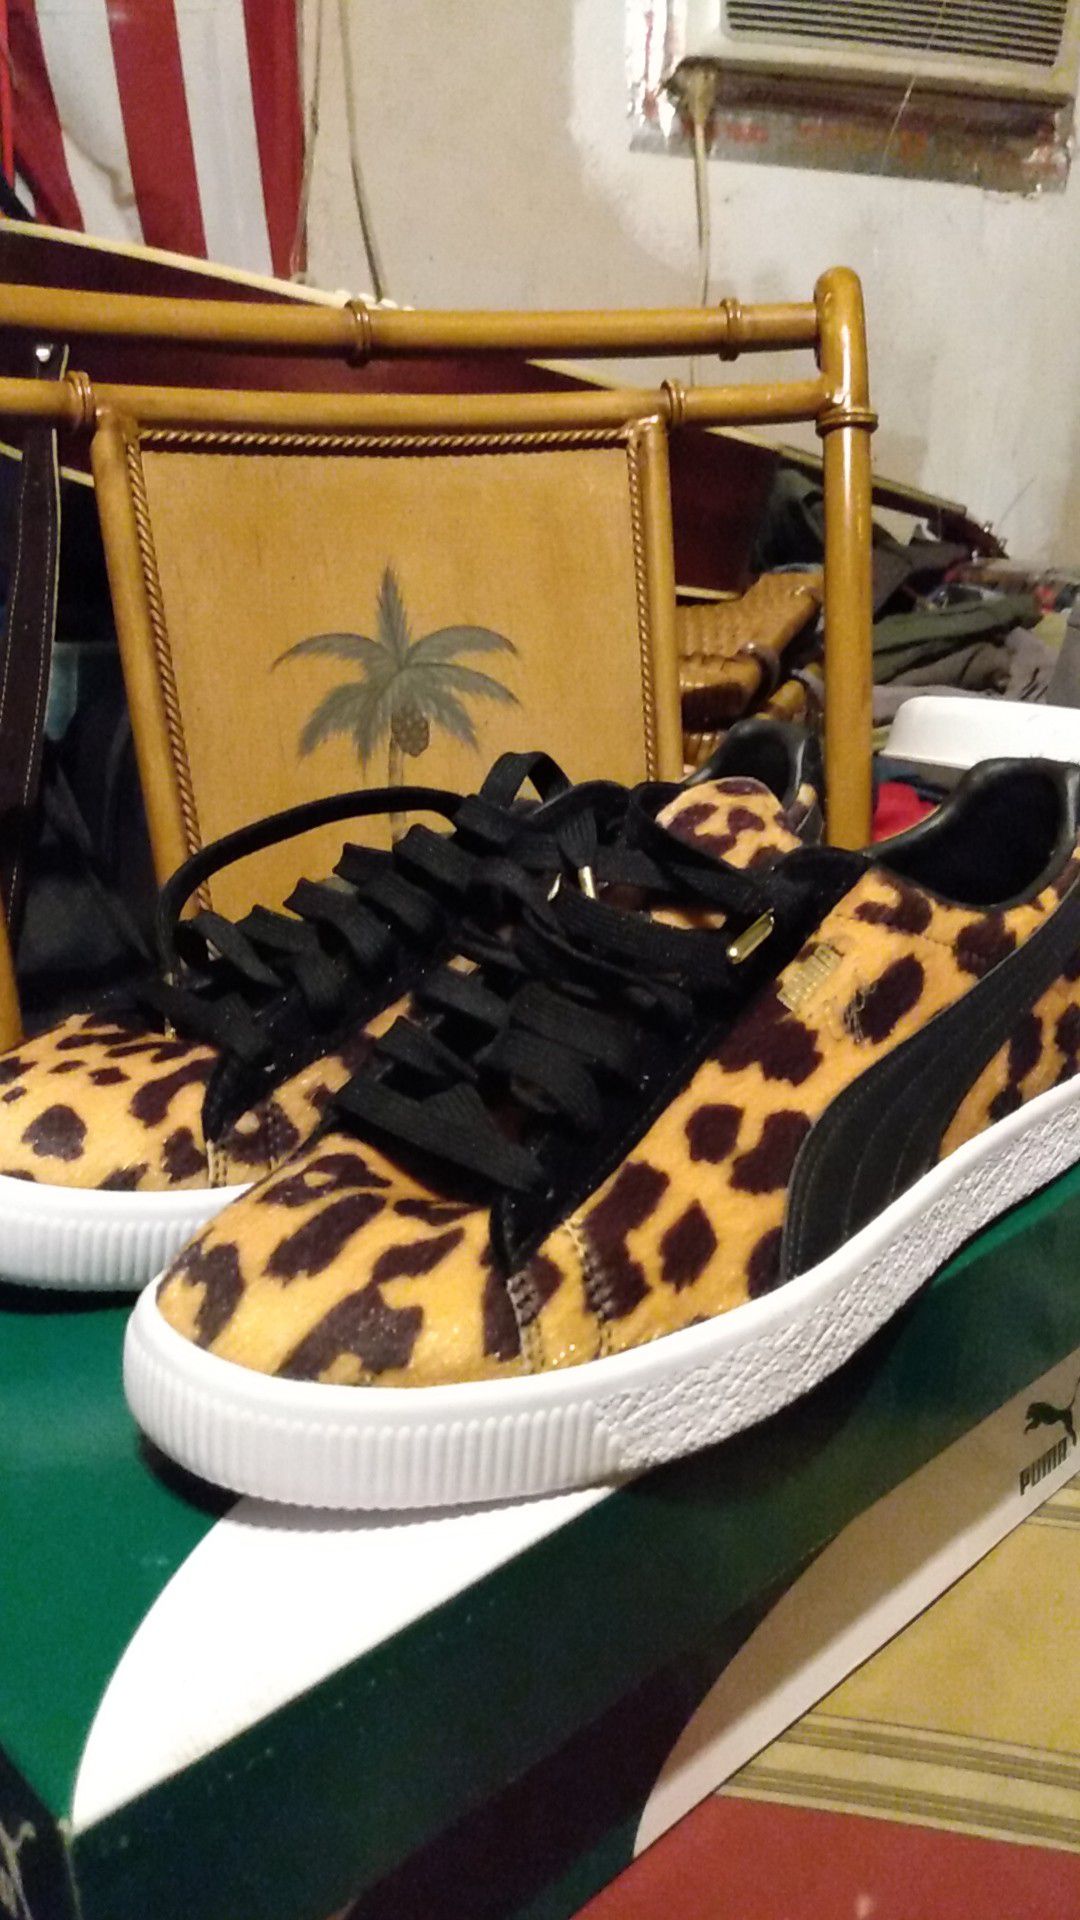 BRAND NEW!! Size 11 Puma Clyde